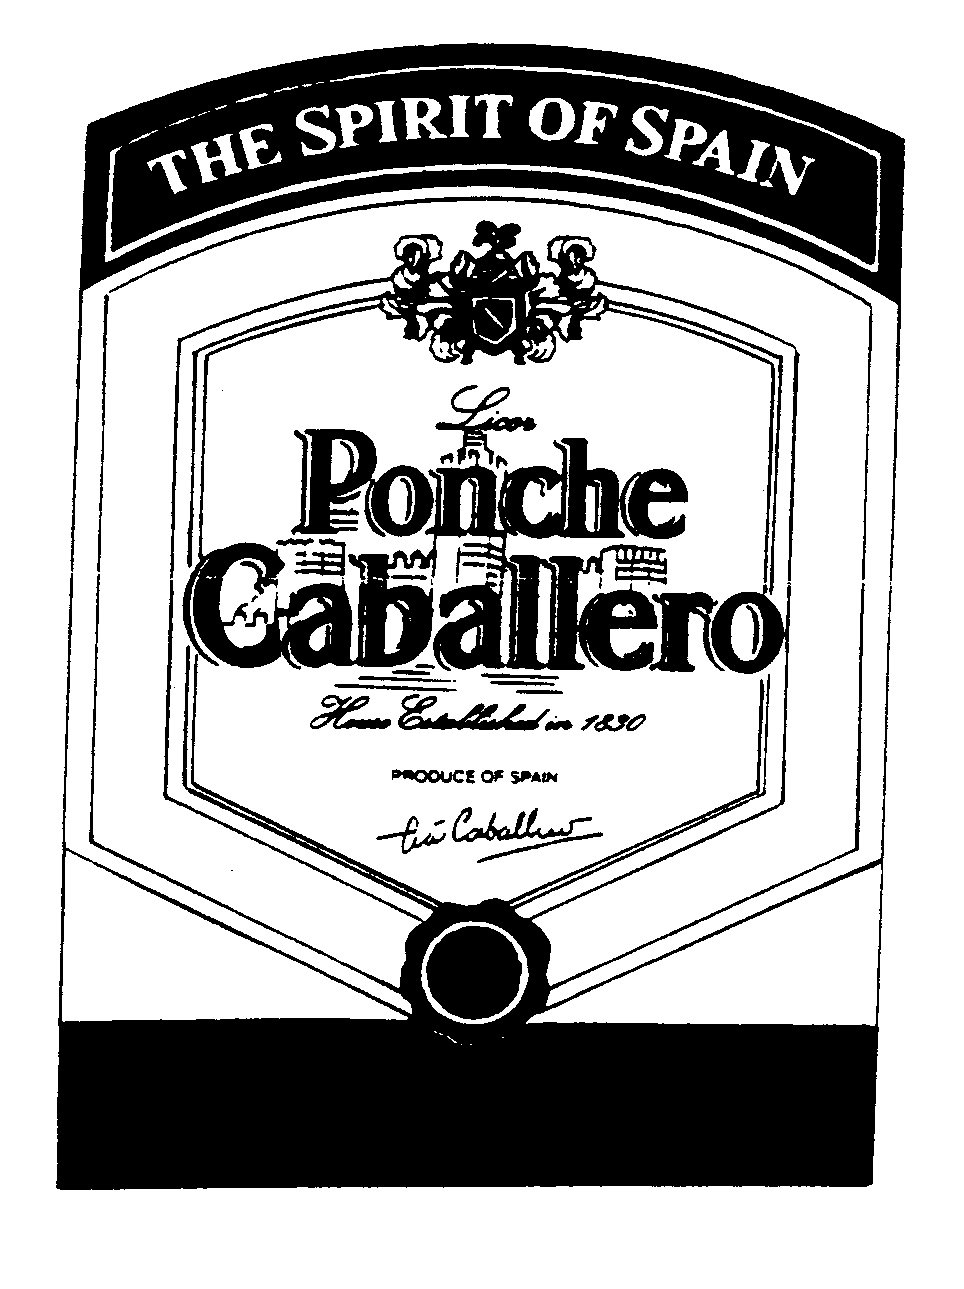  THE SPIRIT OF SPAIN PONCHE CABALLERO PRODUCE OF SPAIN LICOR HOUSE ESTABLISHED IN 1830 TIA CABALLERO LUIS CABALLERO, S.A.